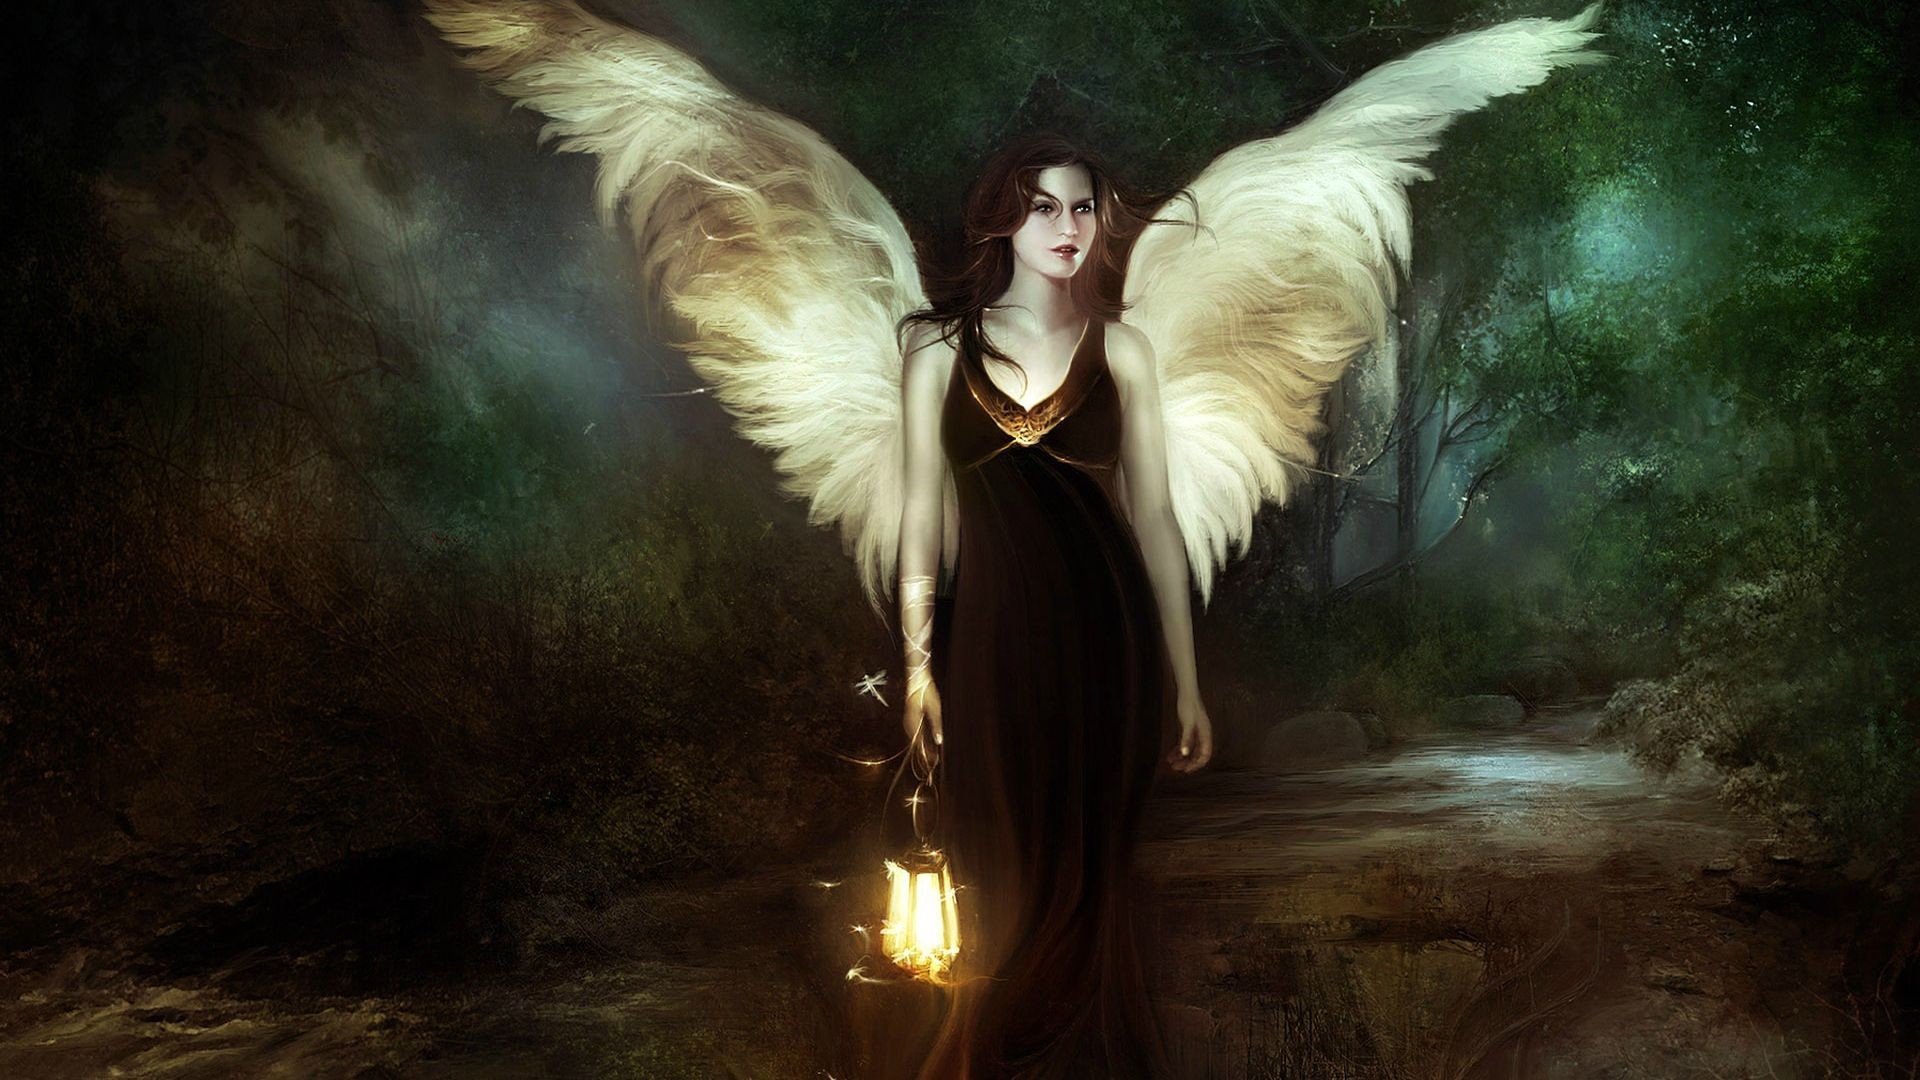 1920x1080 Search Results for “guardian angel desktop wallpapers” – Adorable Wallpapers